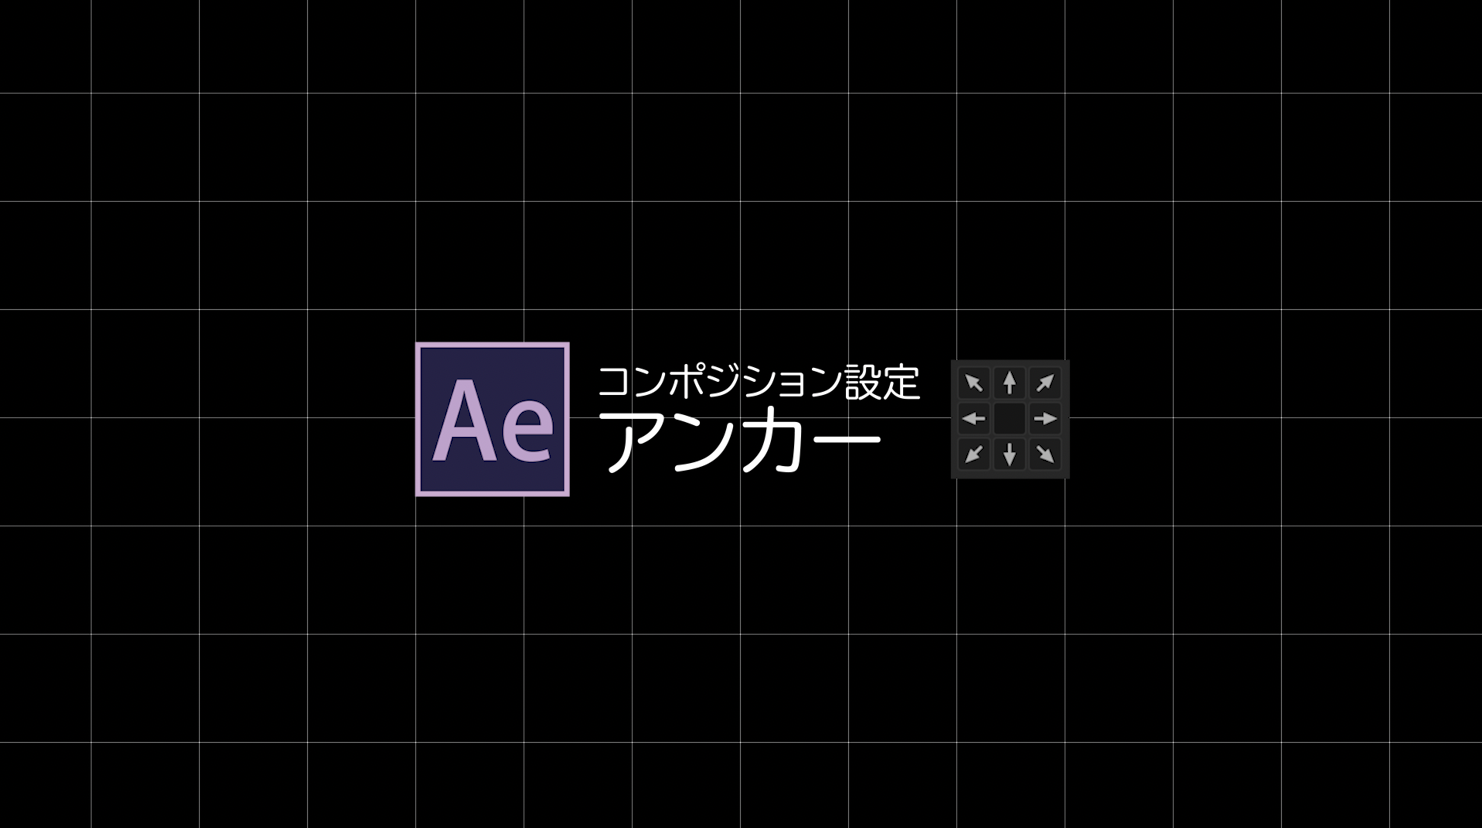 [After Effects]コンポジション設定のアンカー